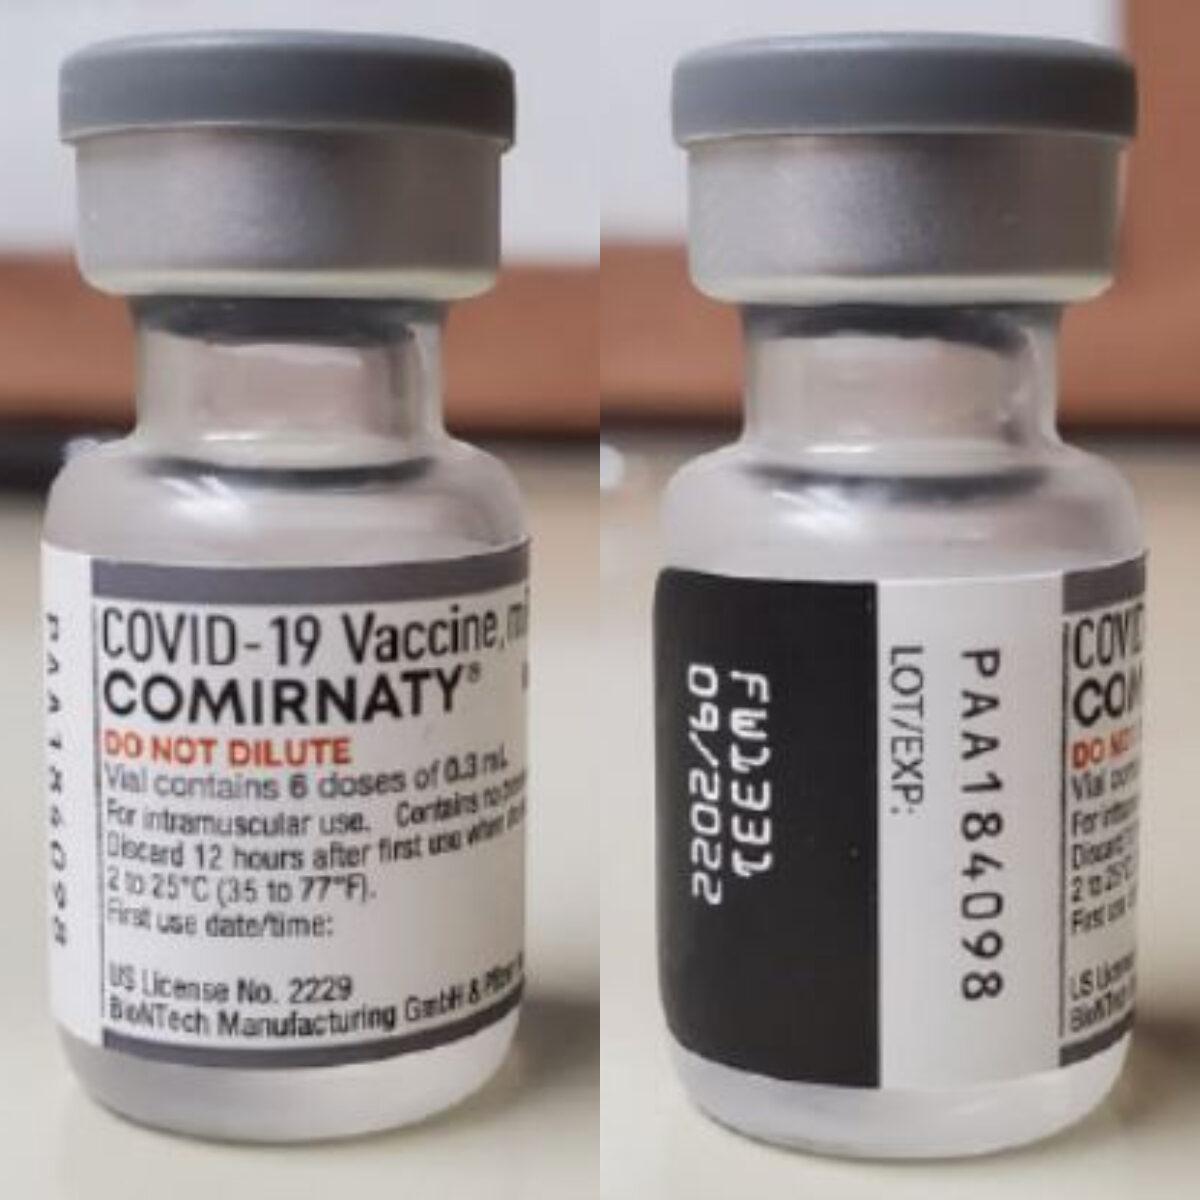 A COVID-19 vaccine vial marked Comirnaty in Juneau, Alaska, on June 10, 2022. (Courtesy of Lt. Chad Coppin)